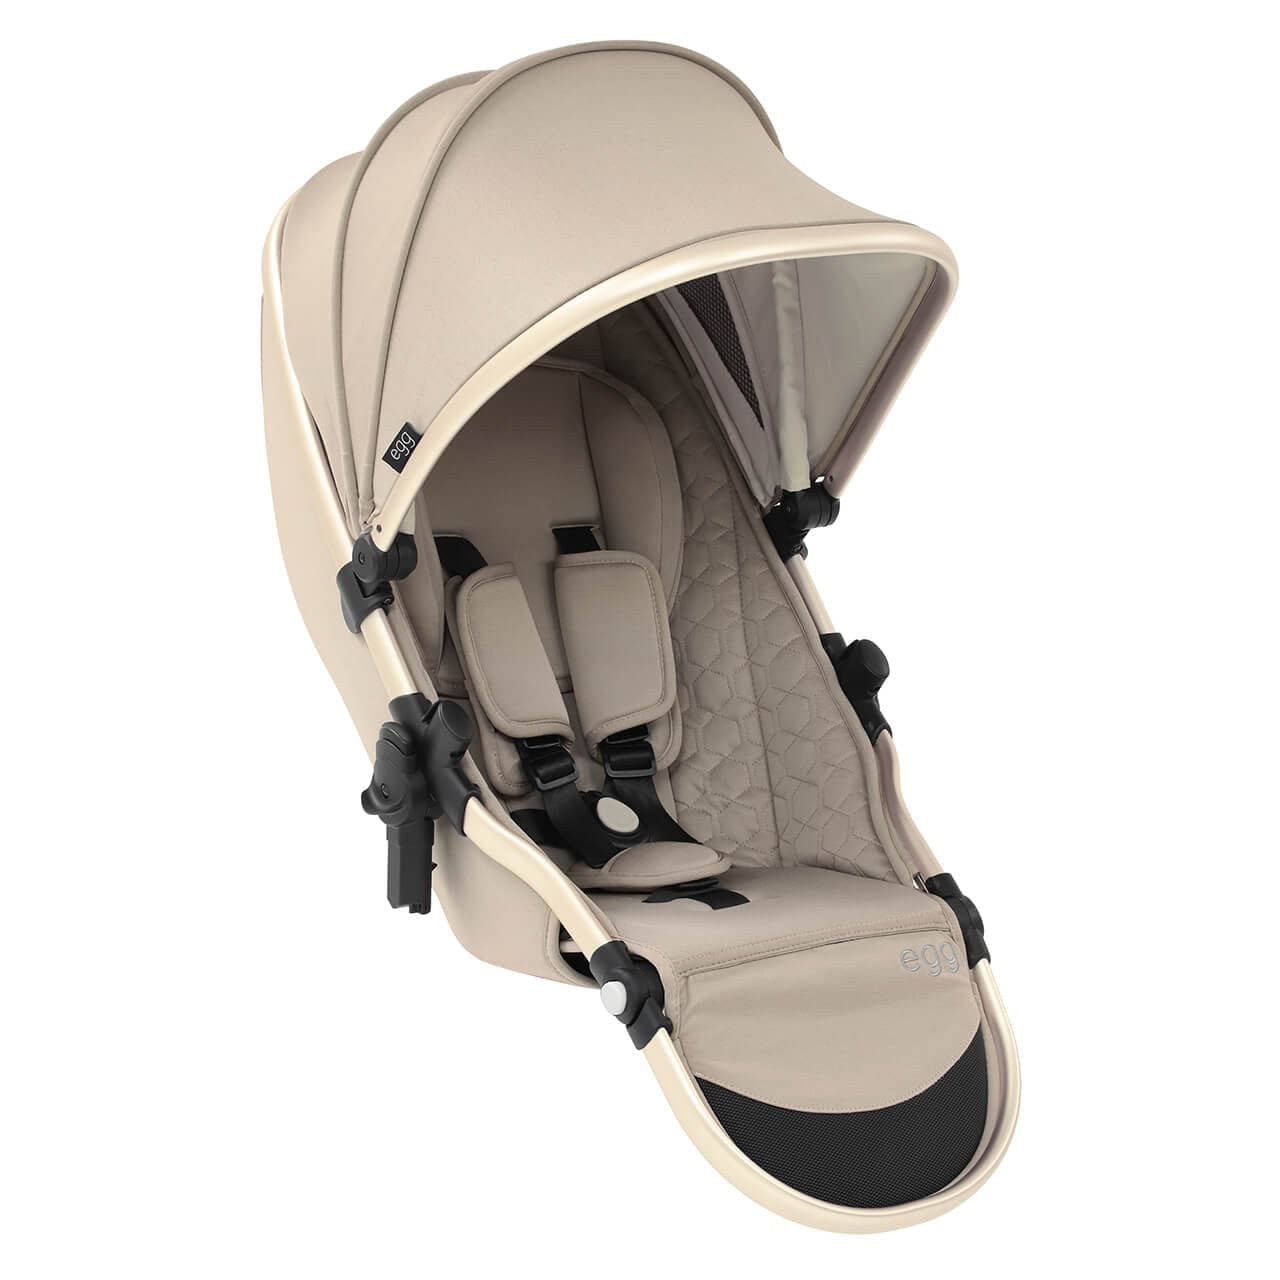 Egg® 2 Tandem Stroller - Feather - For Your Little One